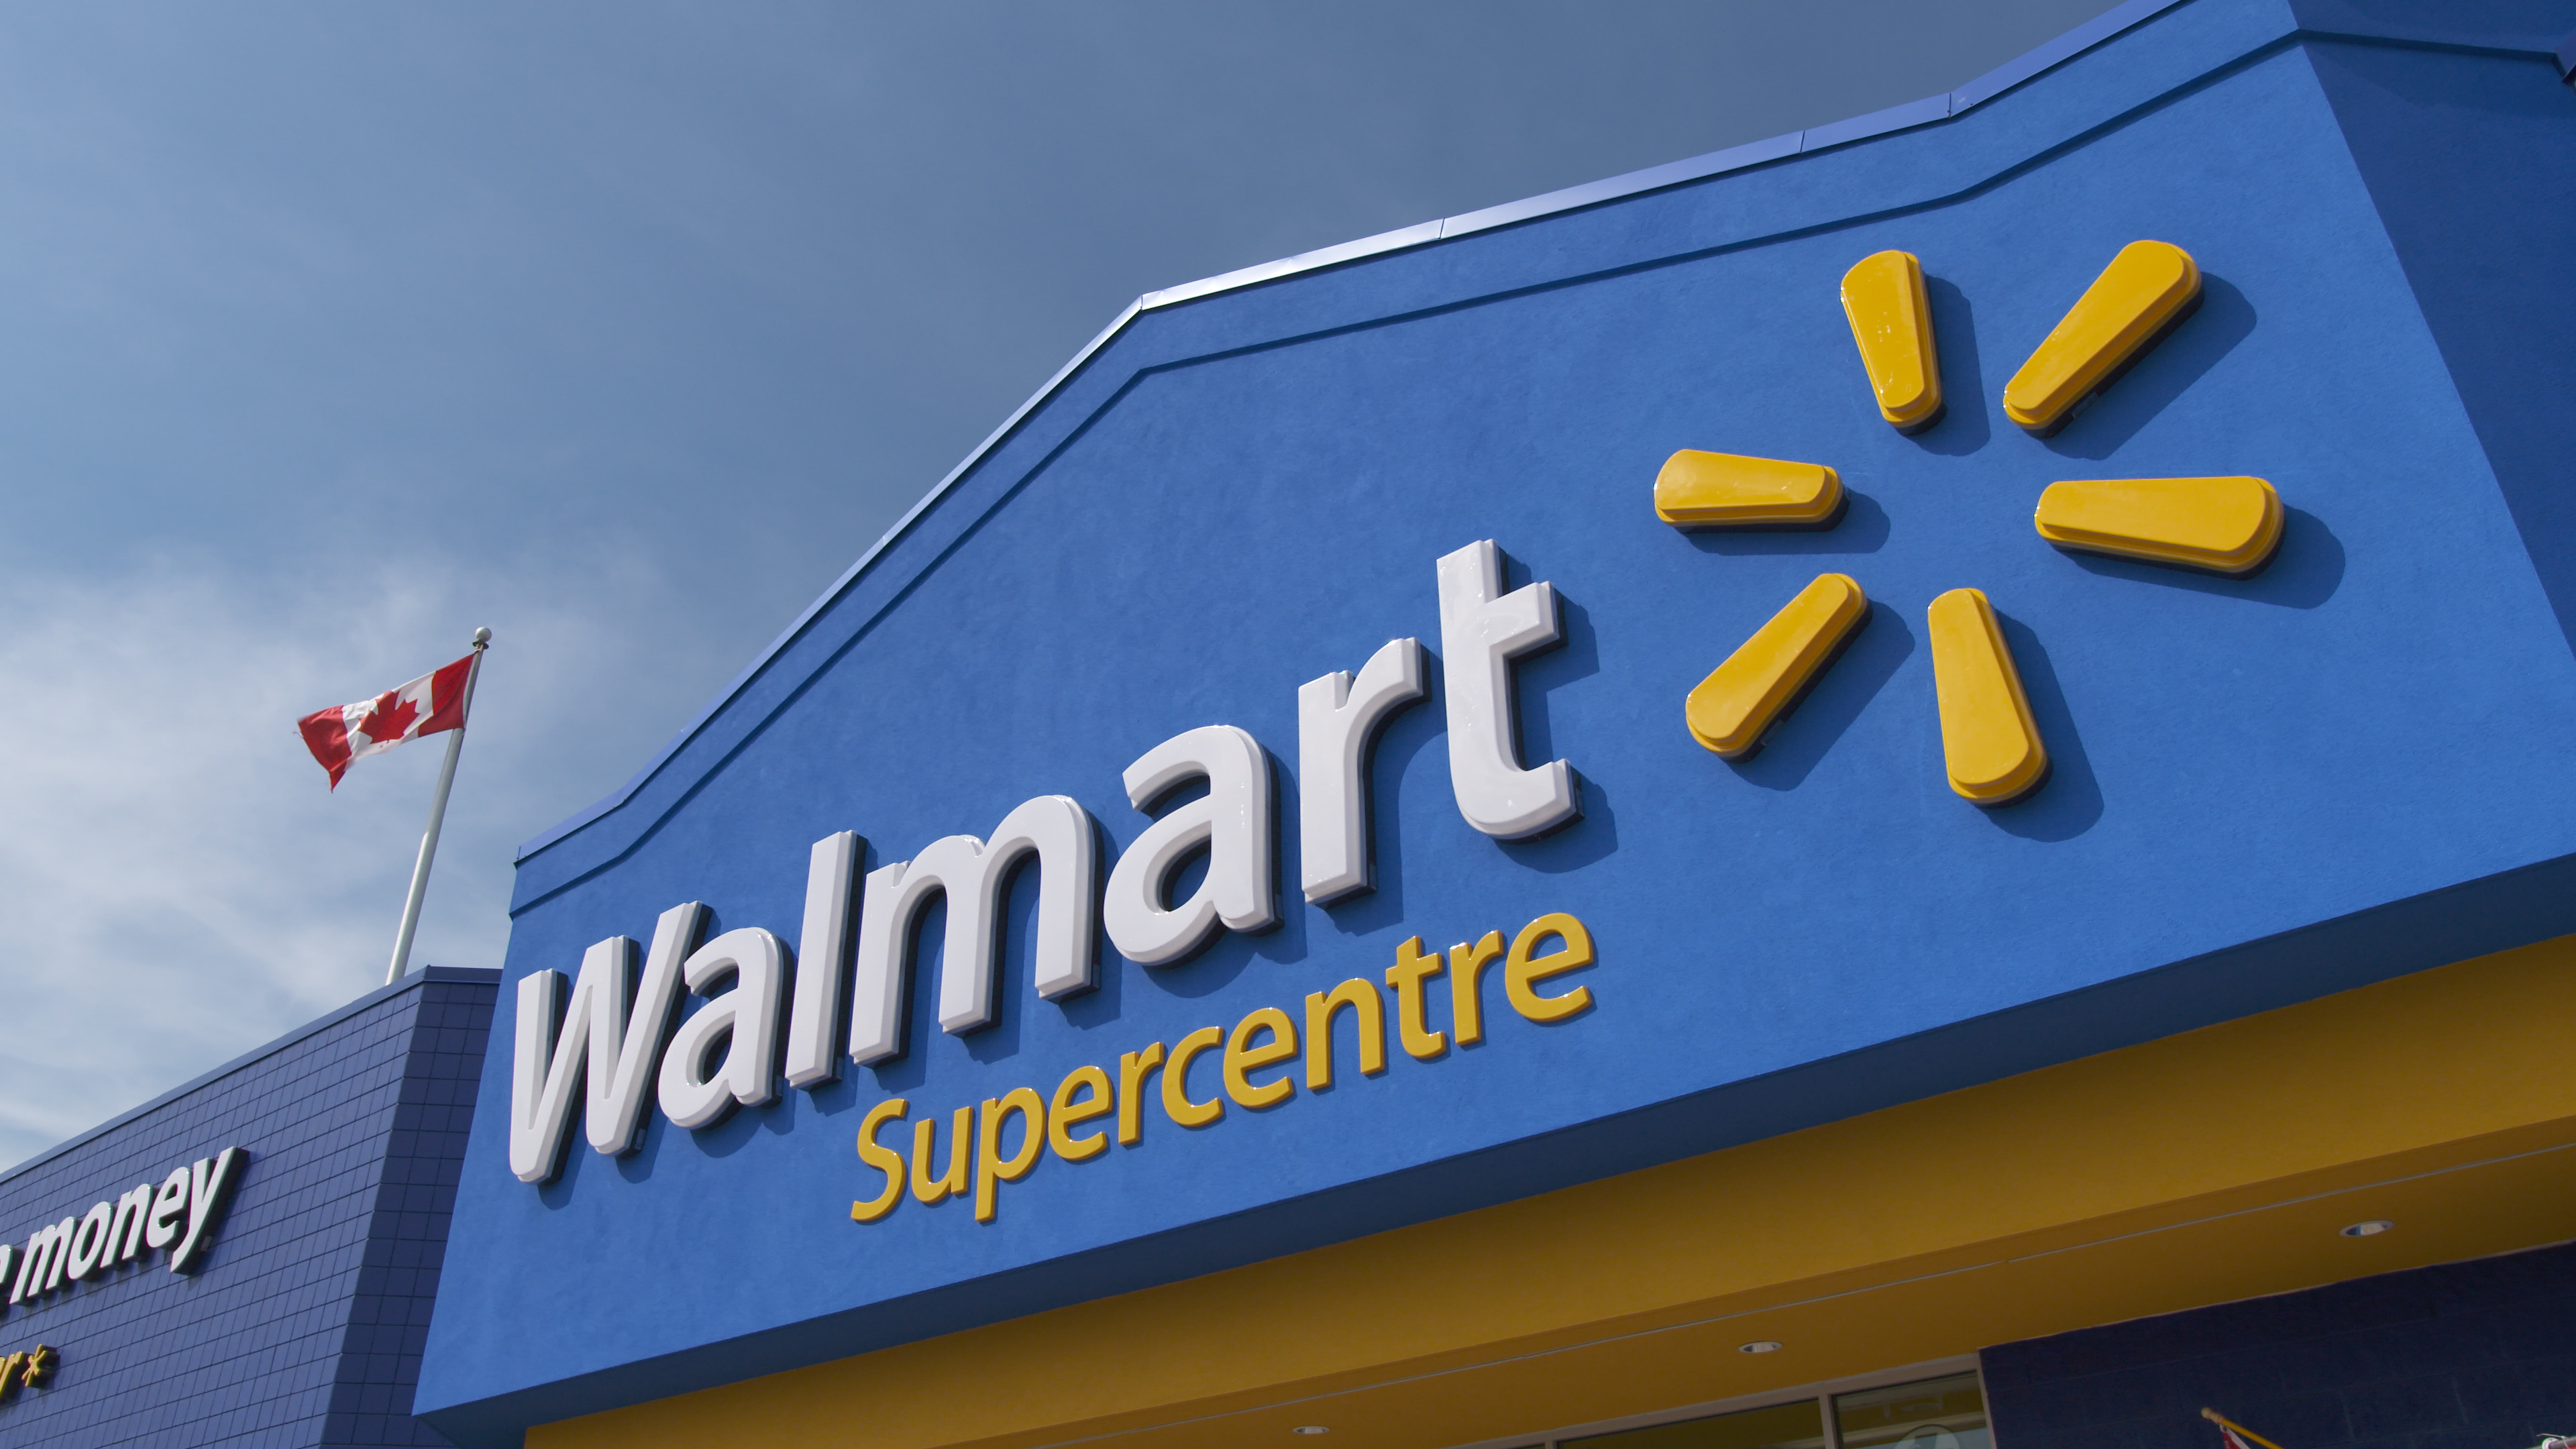 Walmart: A chain of hypermarkets called supercenters, discount department stores, and grocery stores from the United States. 3840x2160 4K Wallpaper.